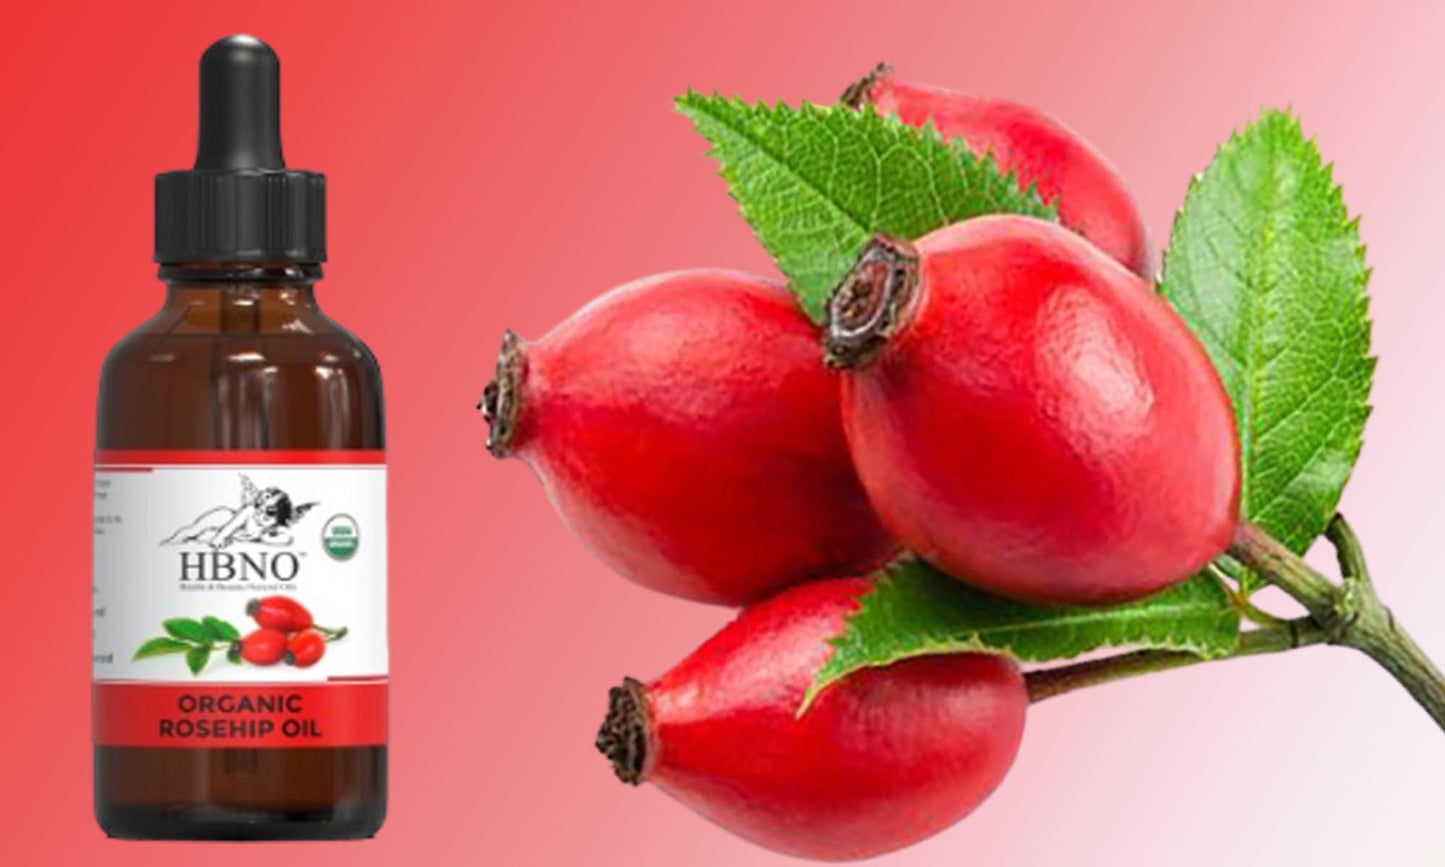 Organic Rosehip Oil and Its Benefits